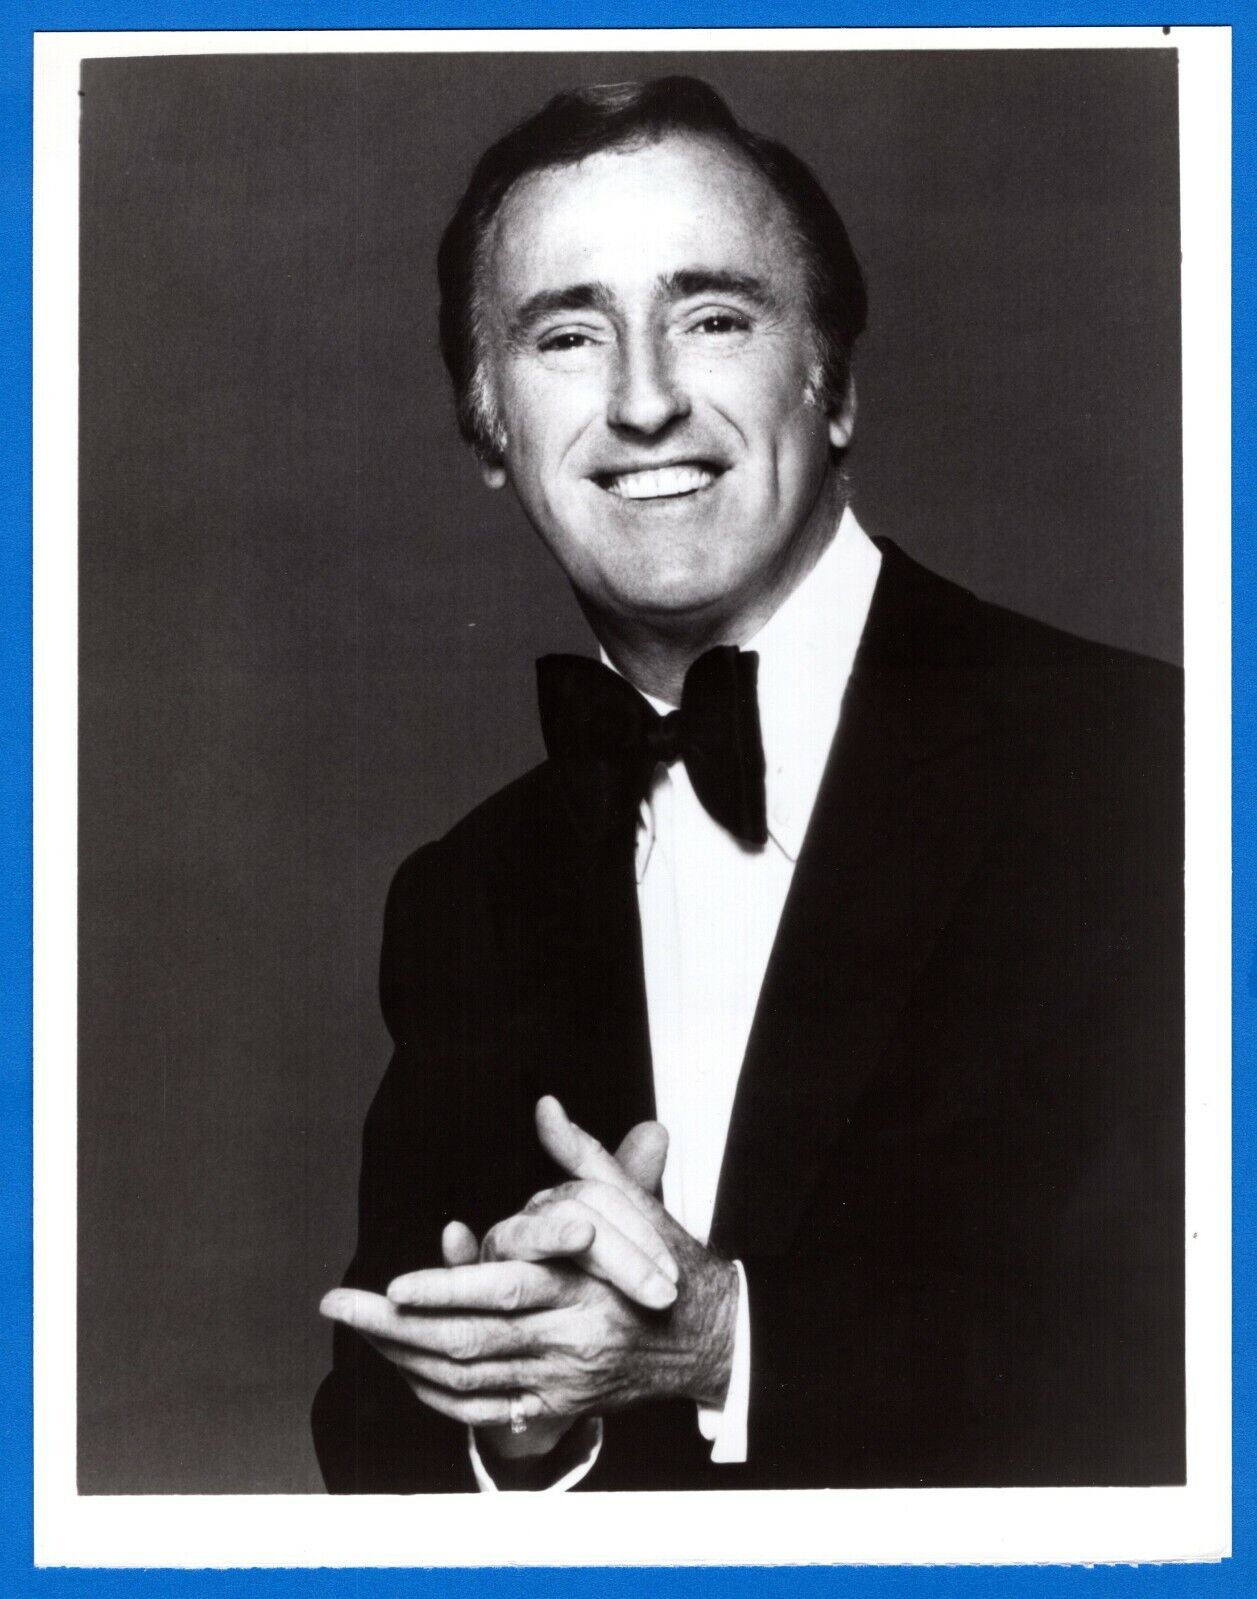 DICK MARTIN Comedian 7x9 Vintage Promo Press News Photo Poster painting MINDREADERS TV Show 1979